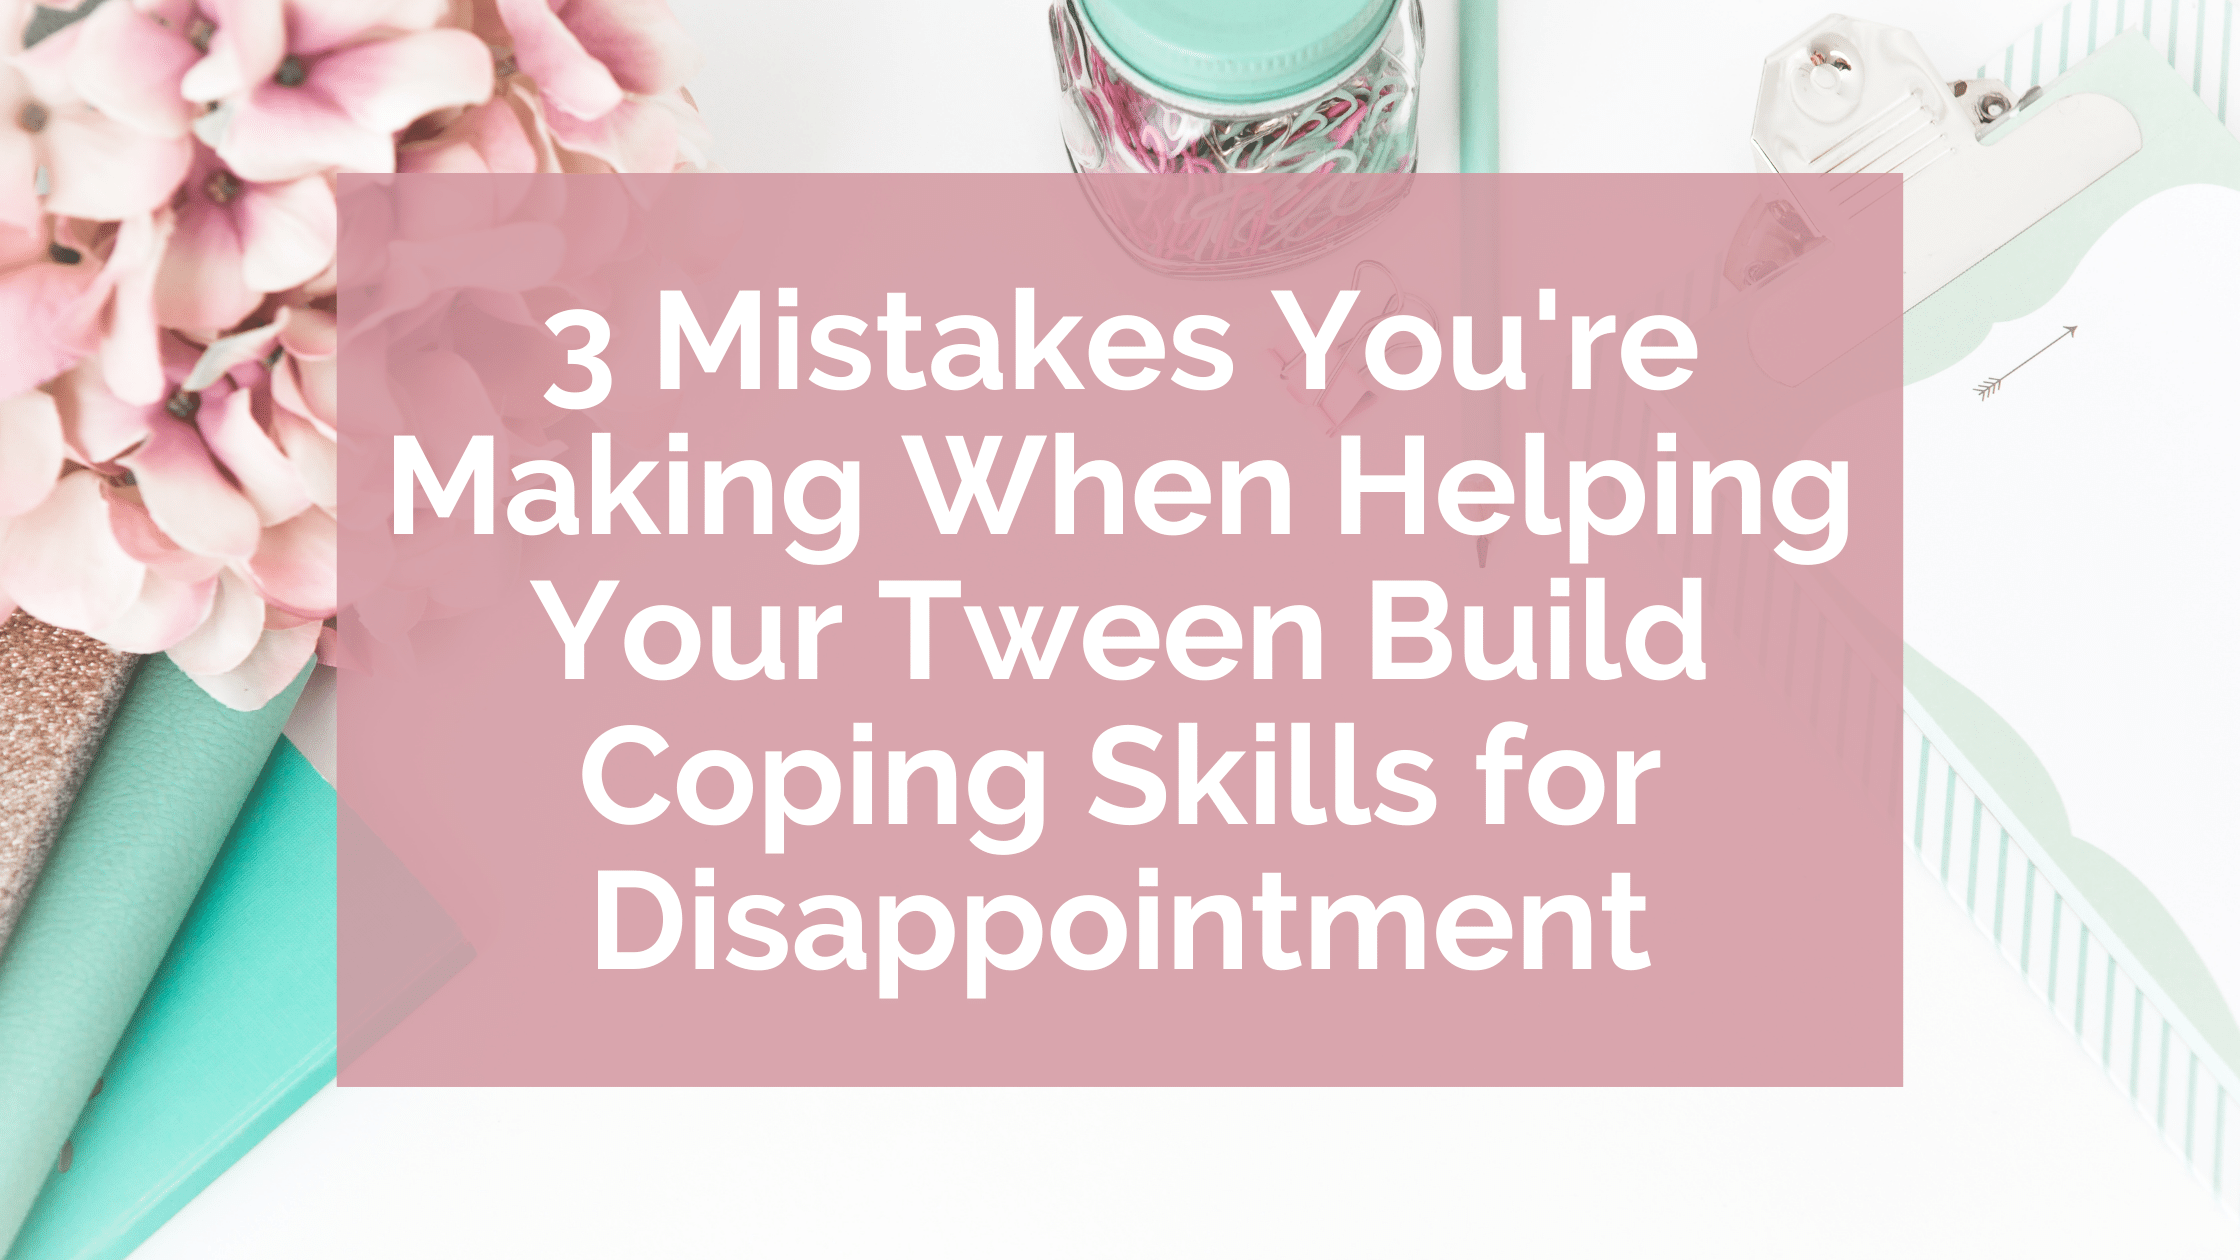 Title: 3 Mistakes You're Making When Helping Your Tween Build Coping Skills for Disappointment